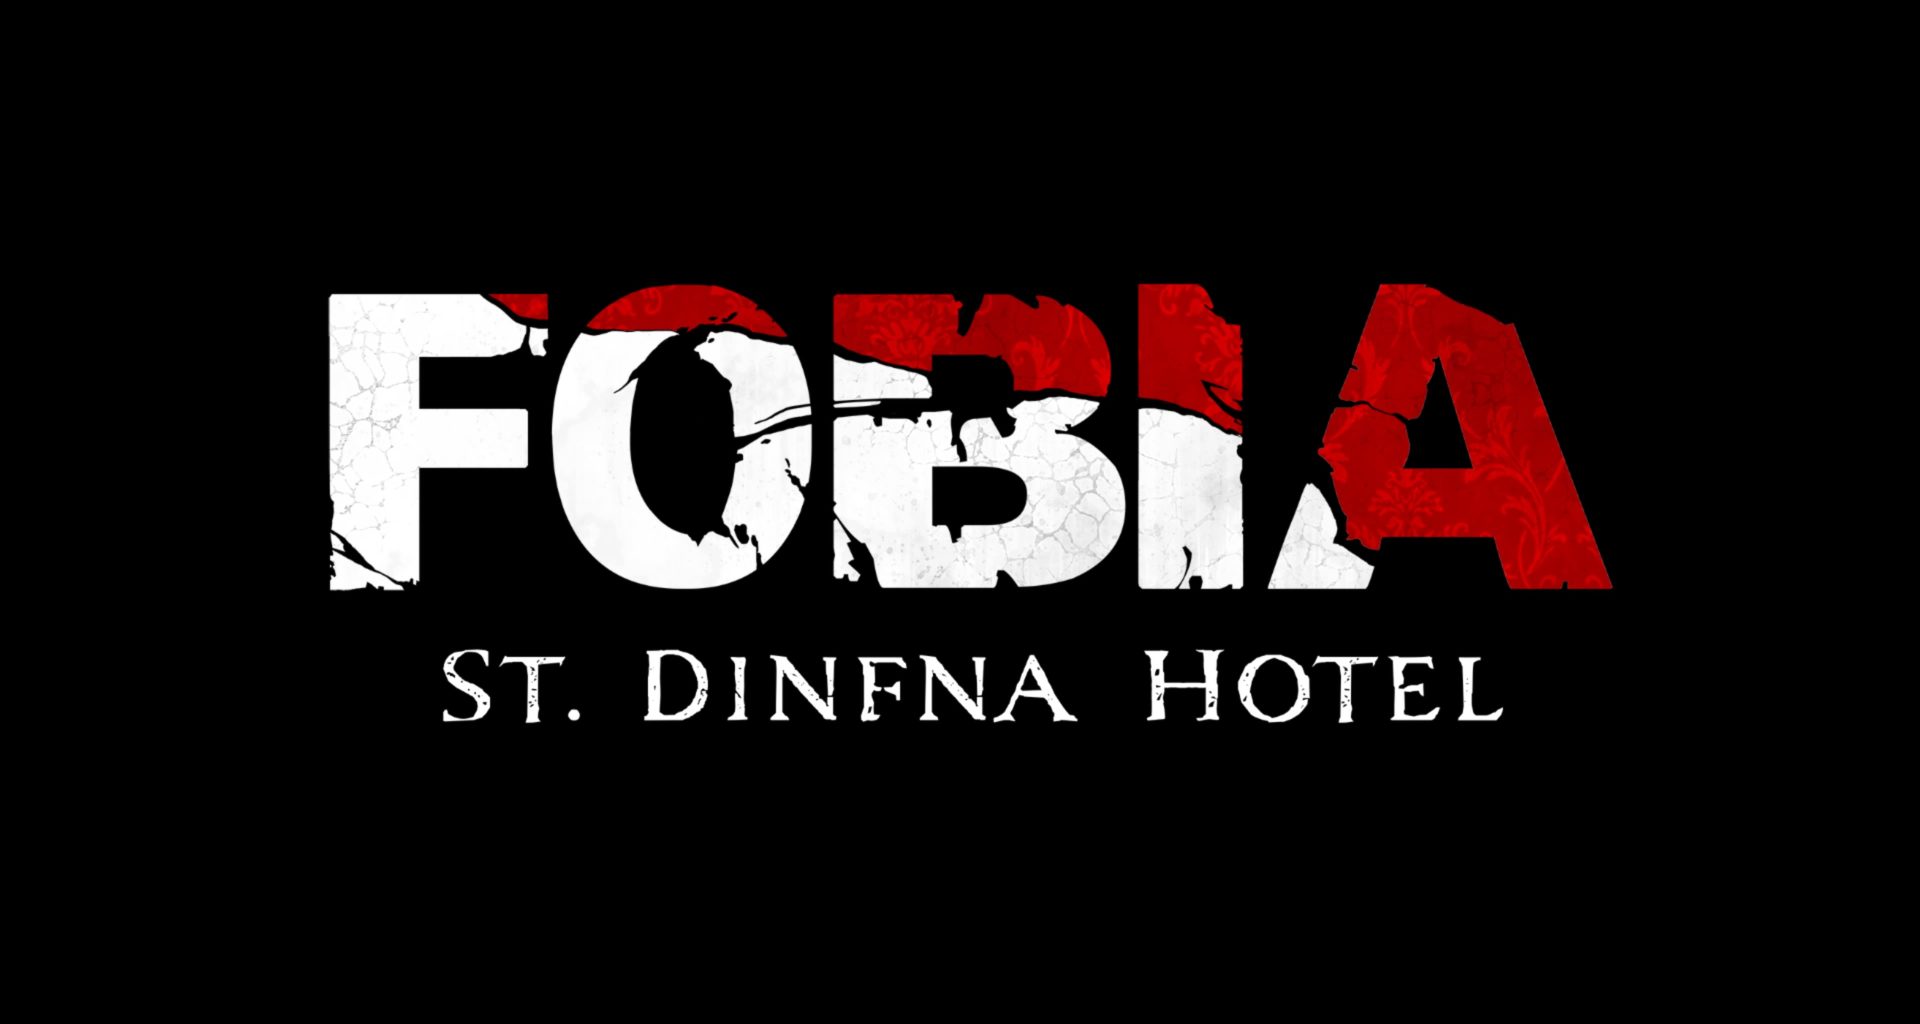 Fobia - St. Dinfna Hotel Review 76